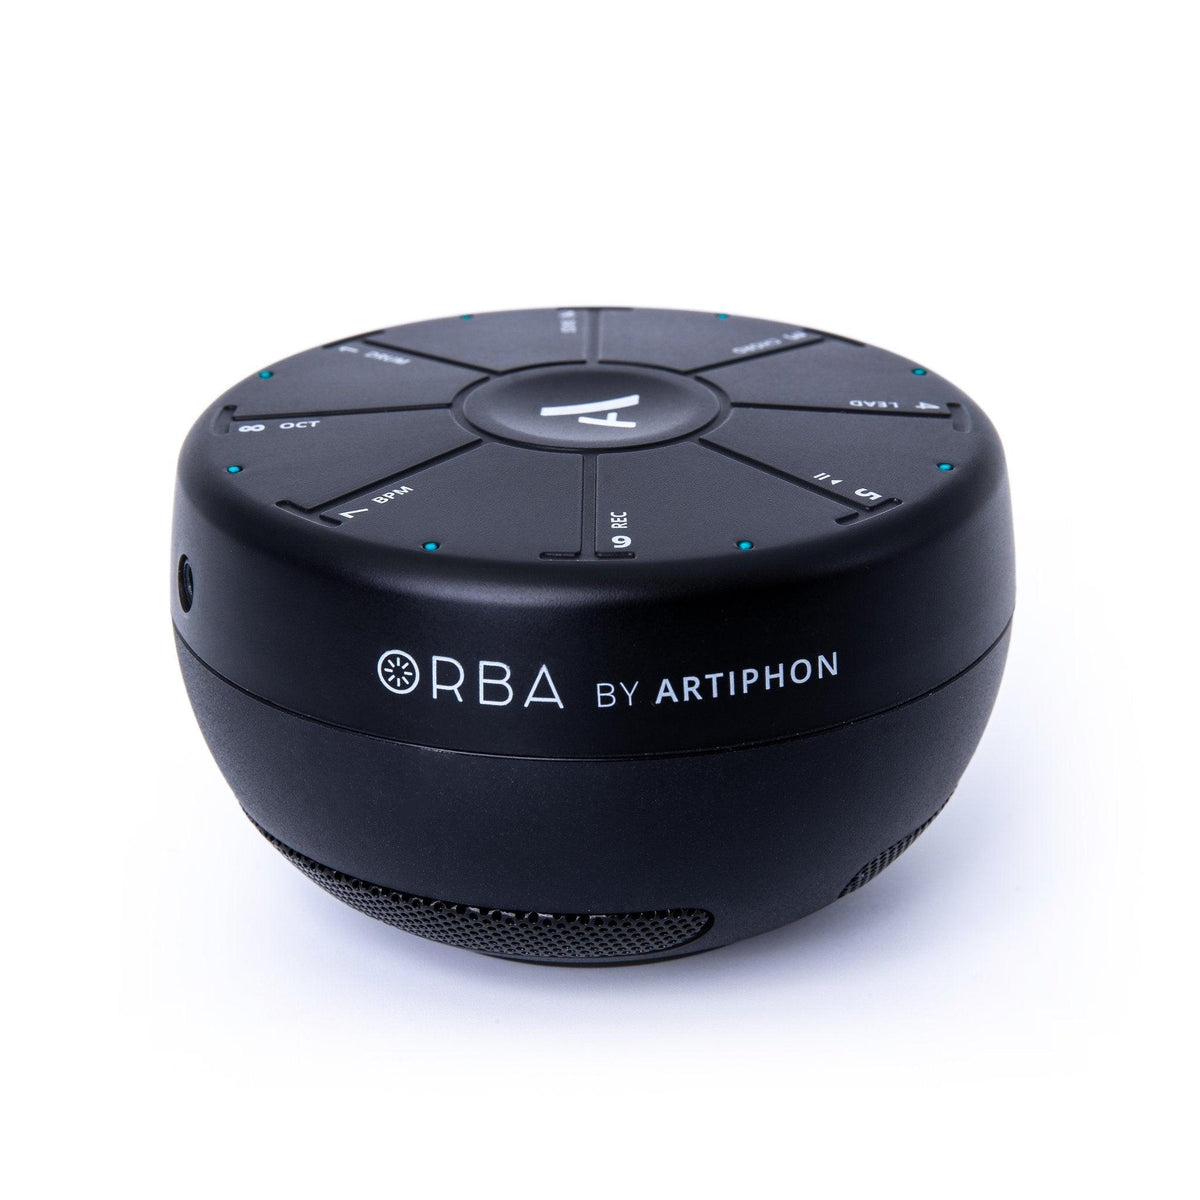 Artiphon Orba handheld synth, looper, and MIDI controller